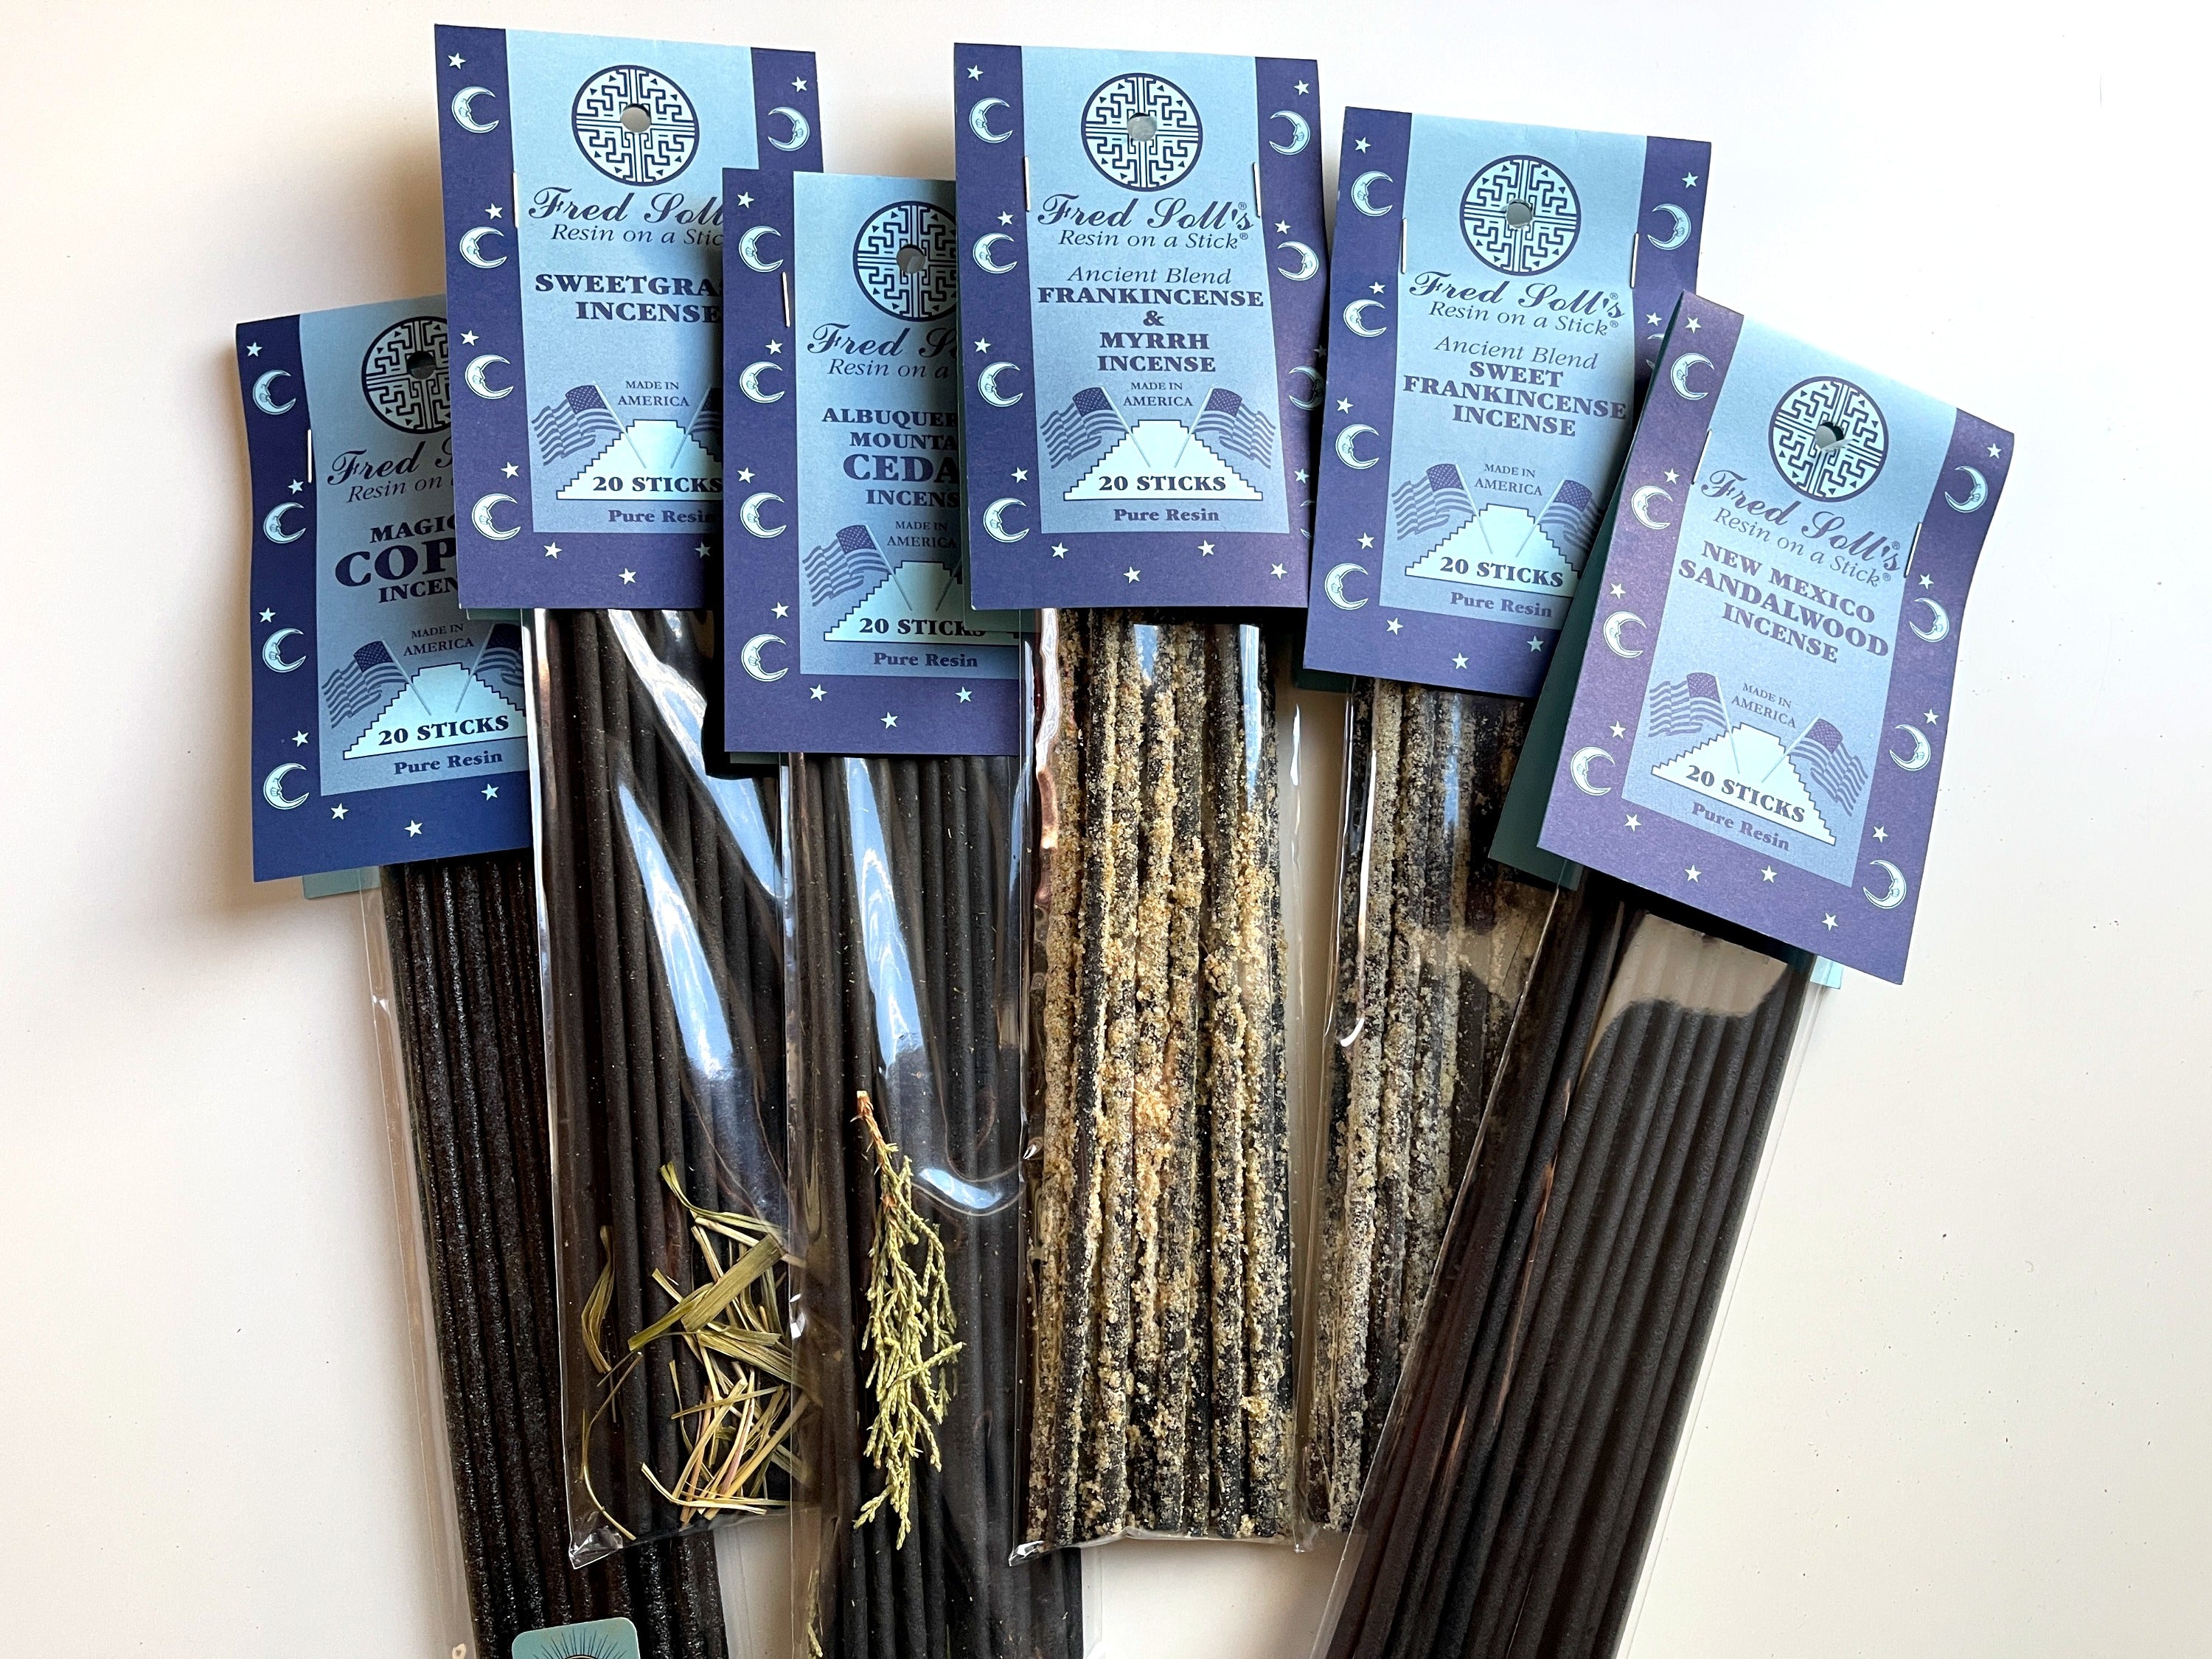 Fred Soll Incense